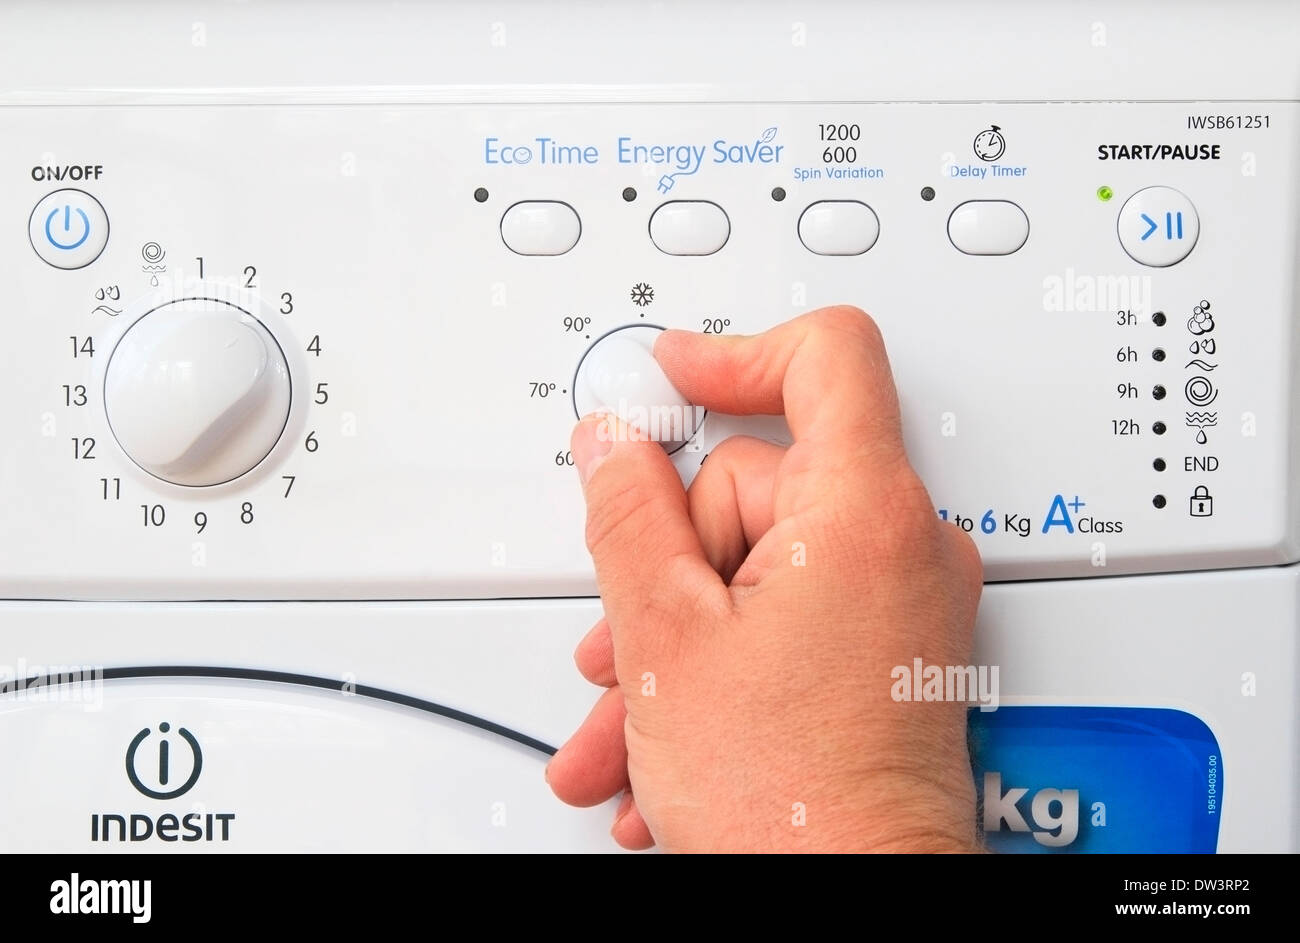 Caucasian Man's Hand Adjusting a Temperature Dial on an Indesit Washing Machine, UK MODEL RELEASED Stock Photo